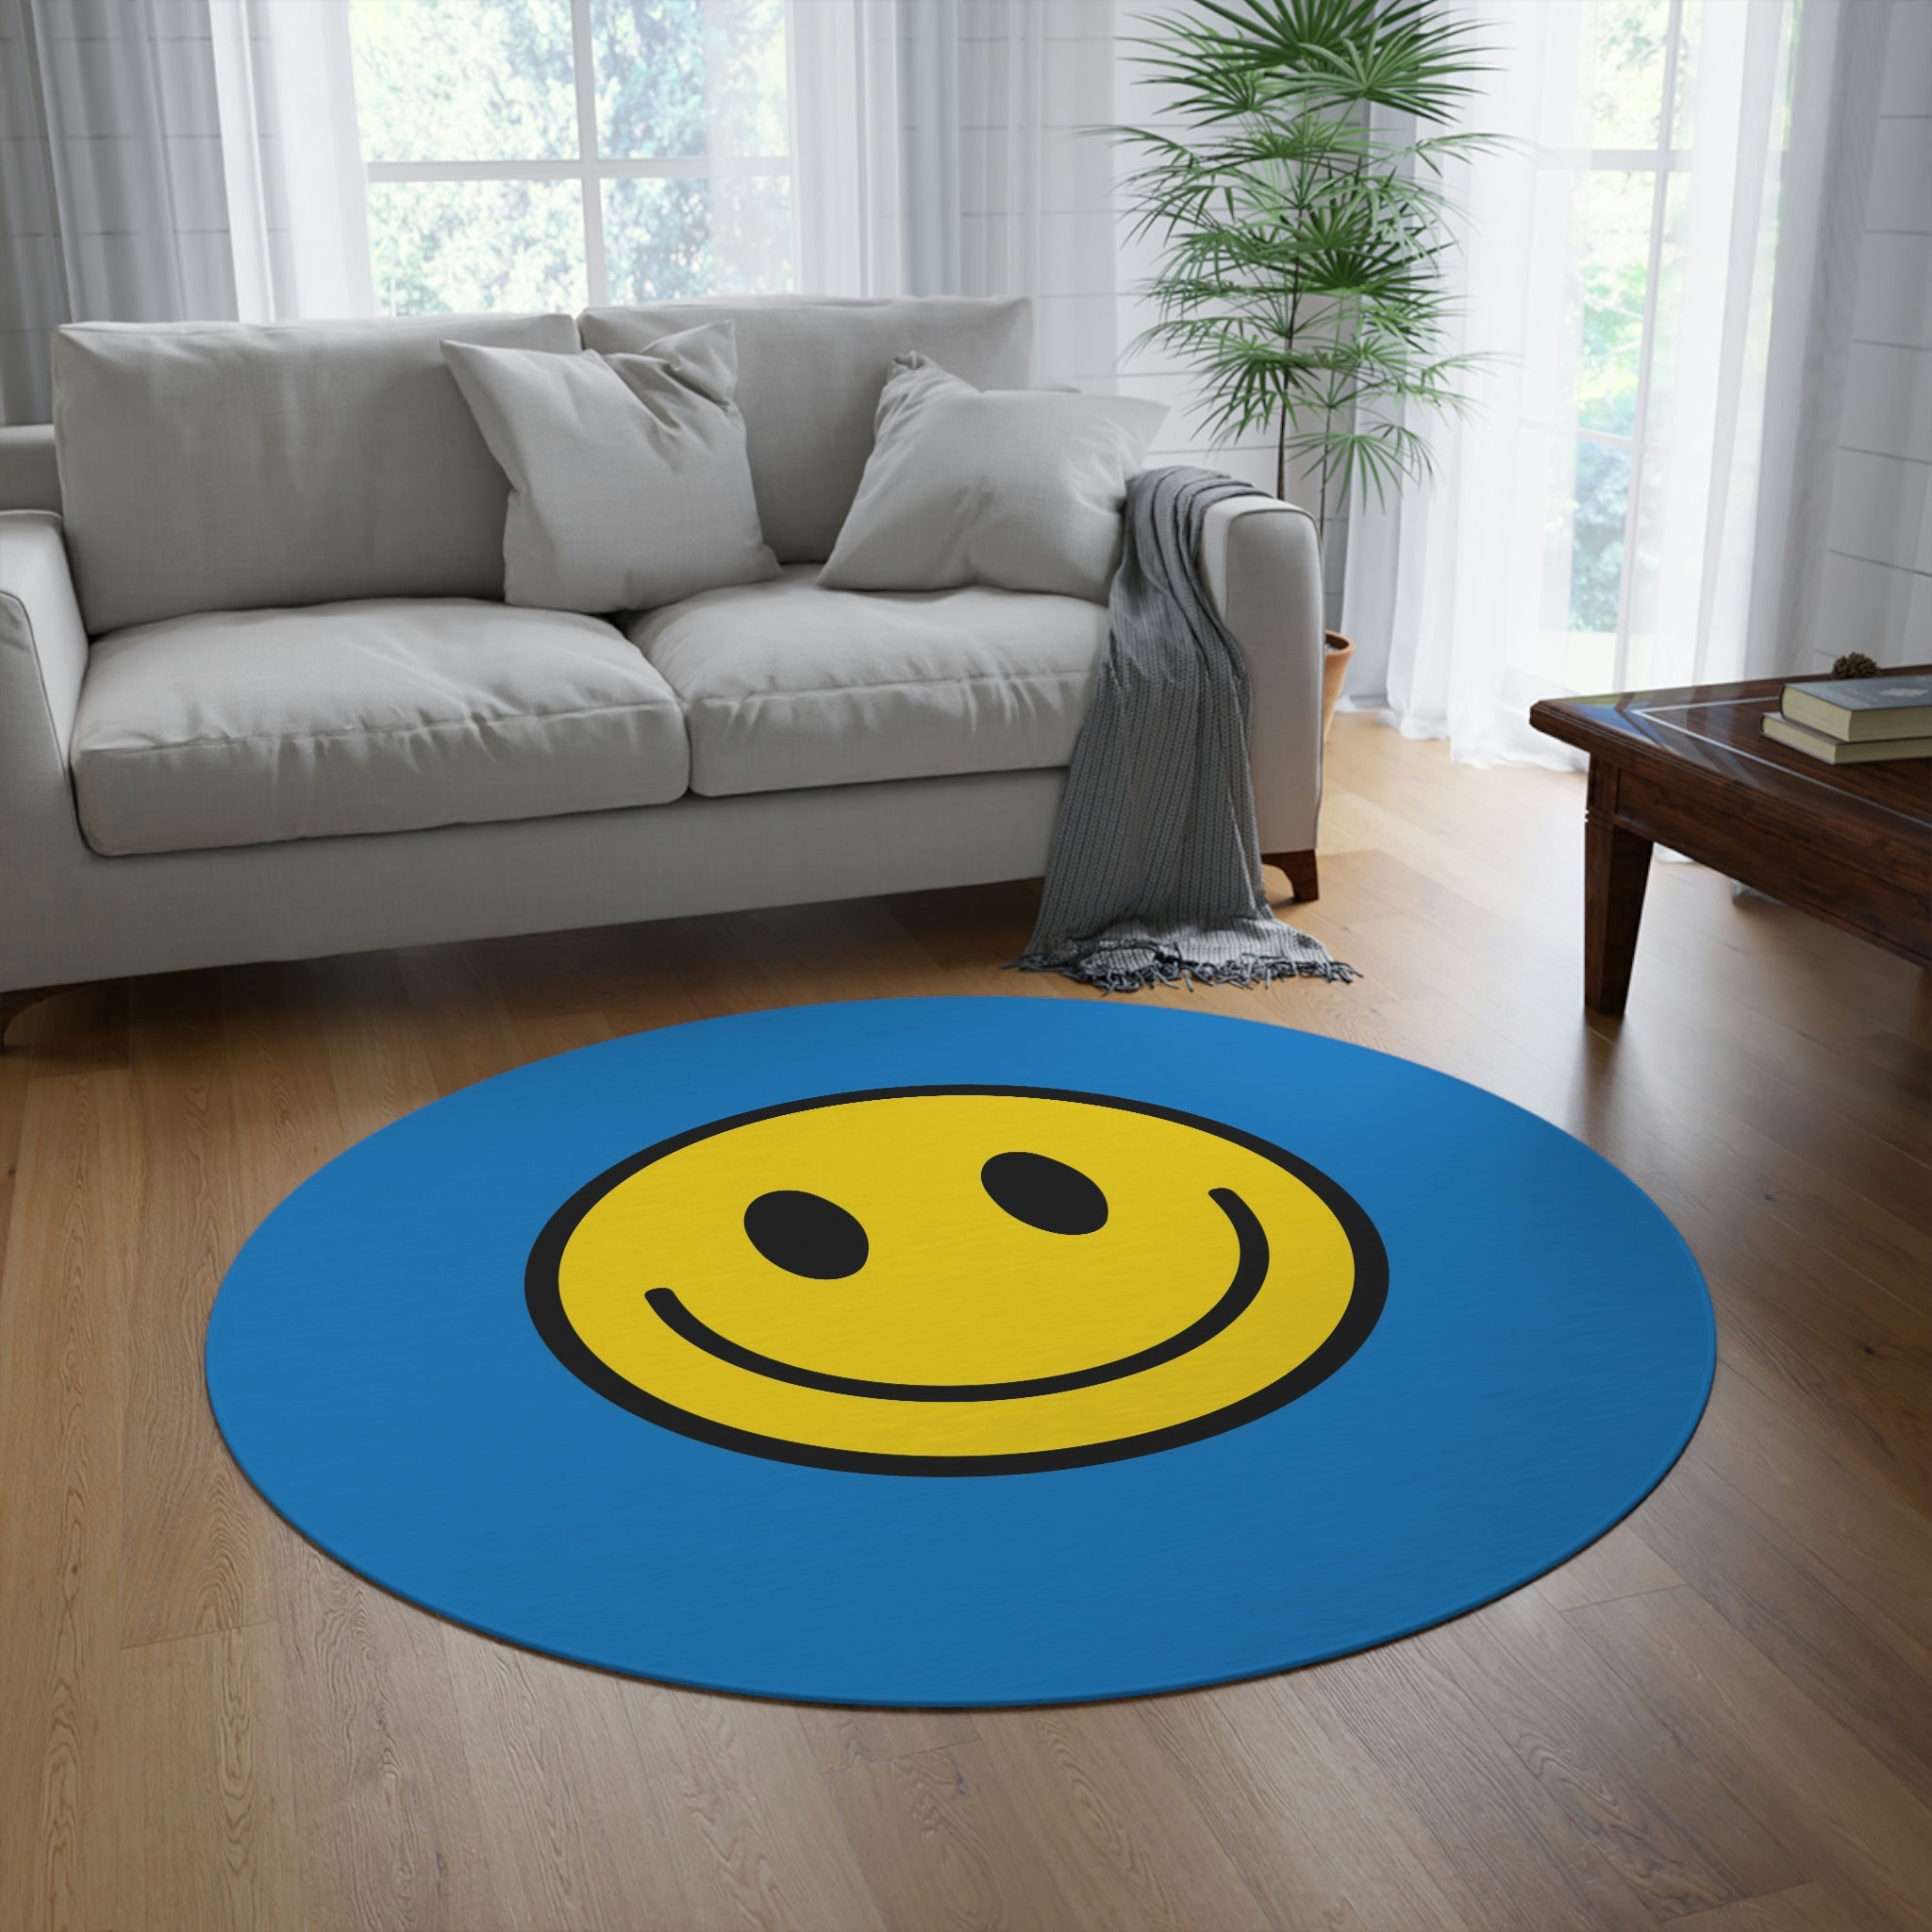 Round Rug Happy Face pattern yellow/blue